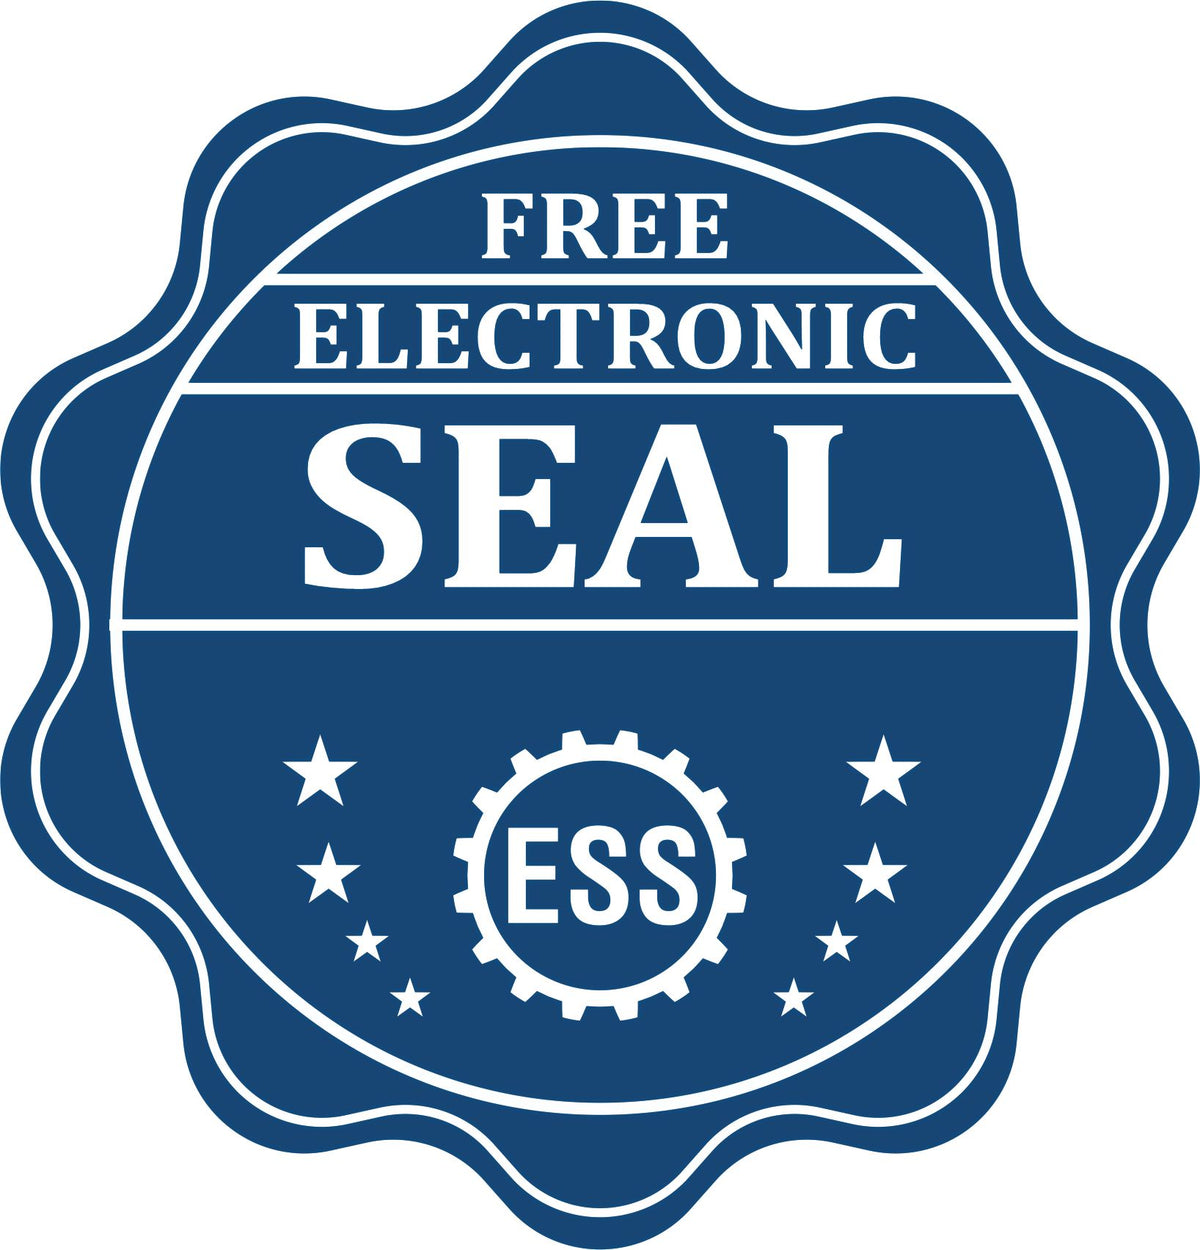 A badge showing a free electronic seal for the Handheld Alaska Architect Seal Embosser with stars and the ESS gear on the emblem.